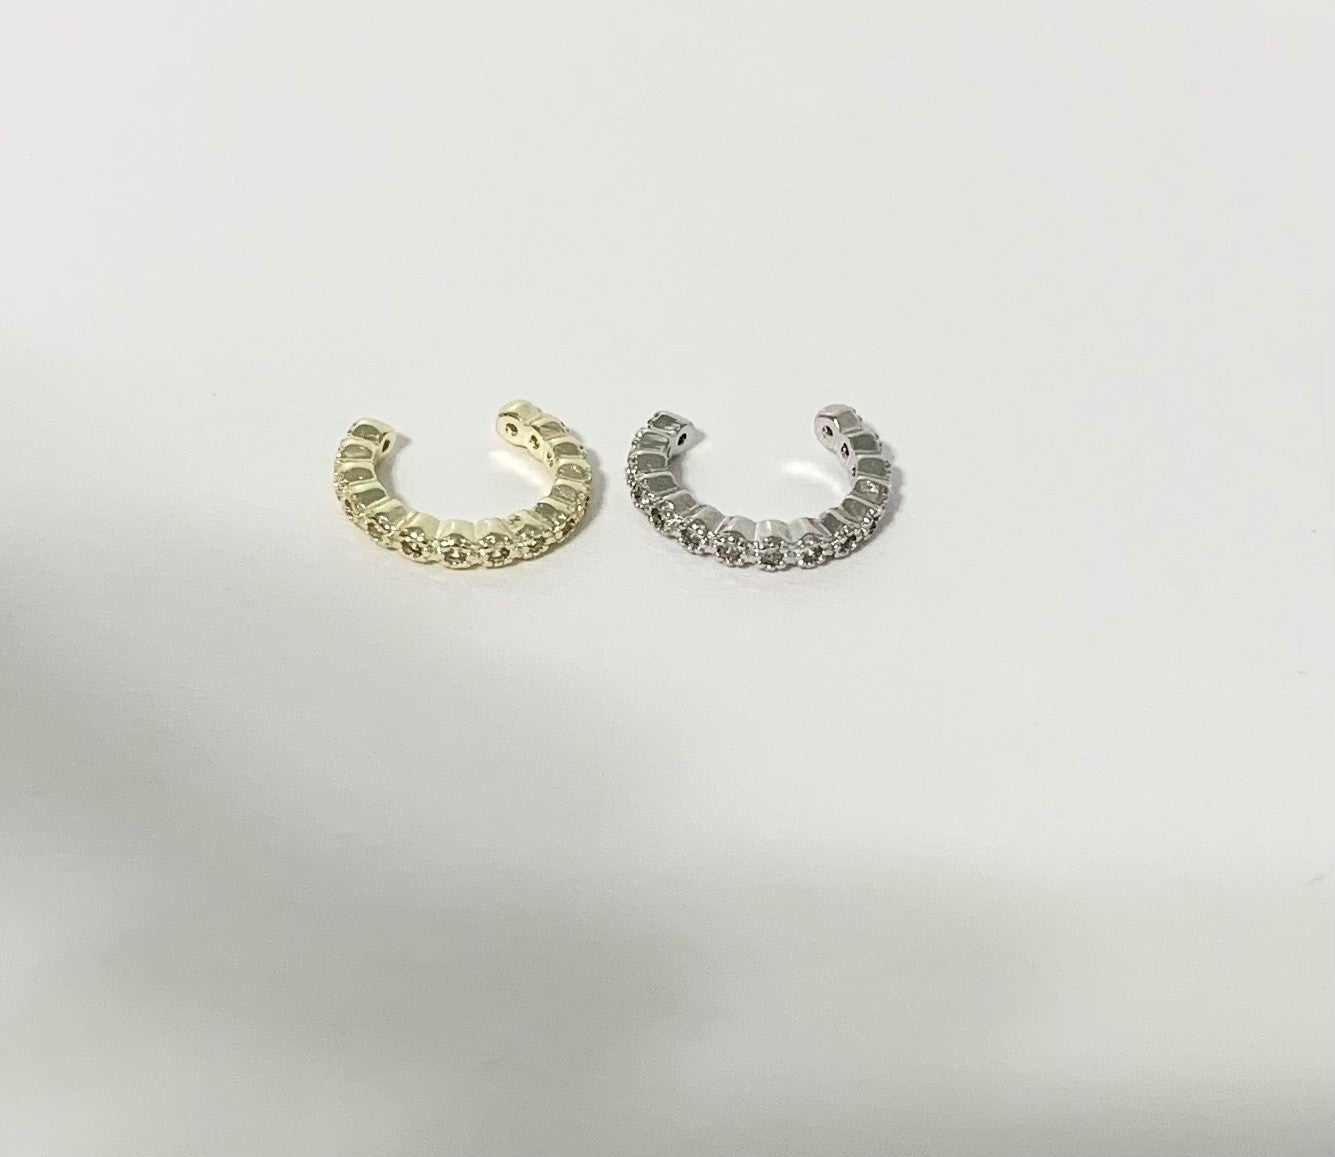 Too Cool Ear Cuff in Silver or Gold